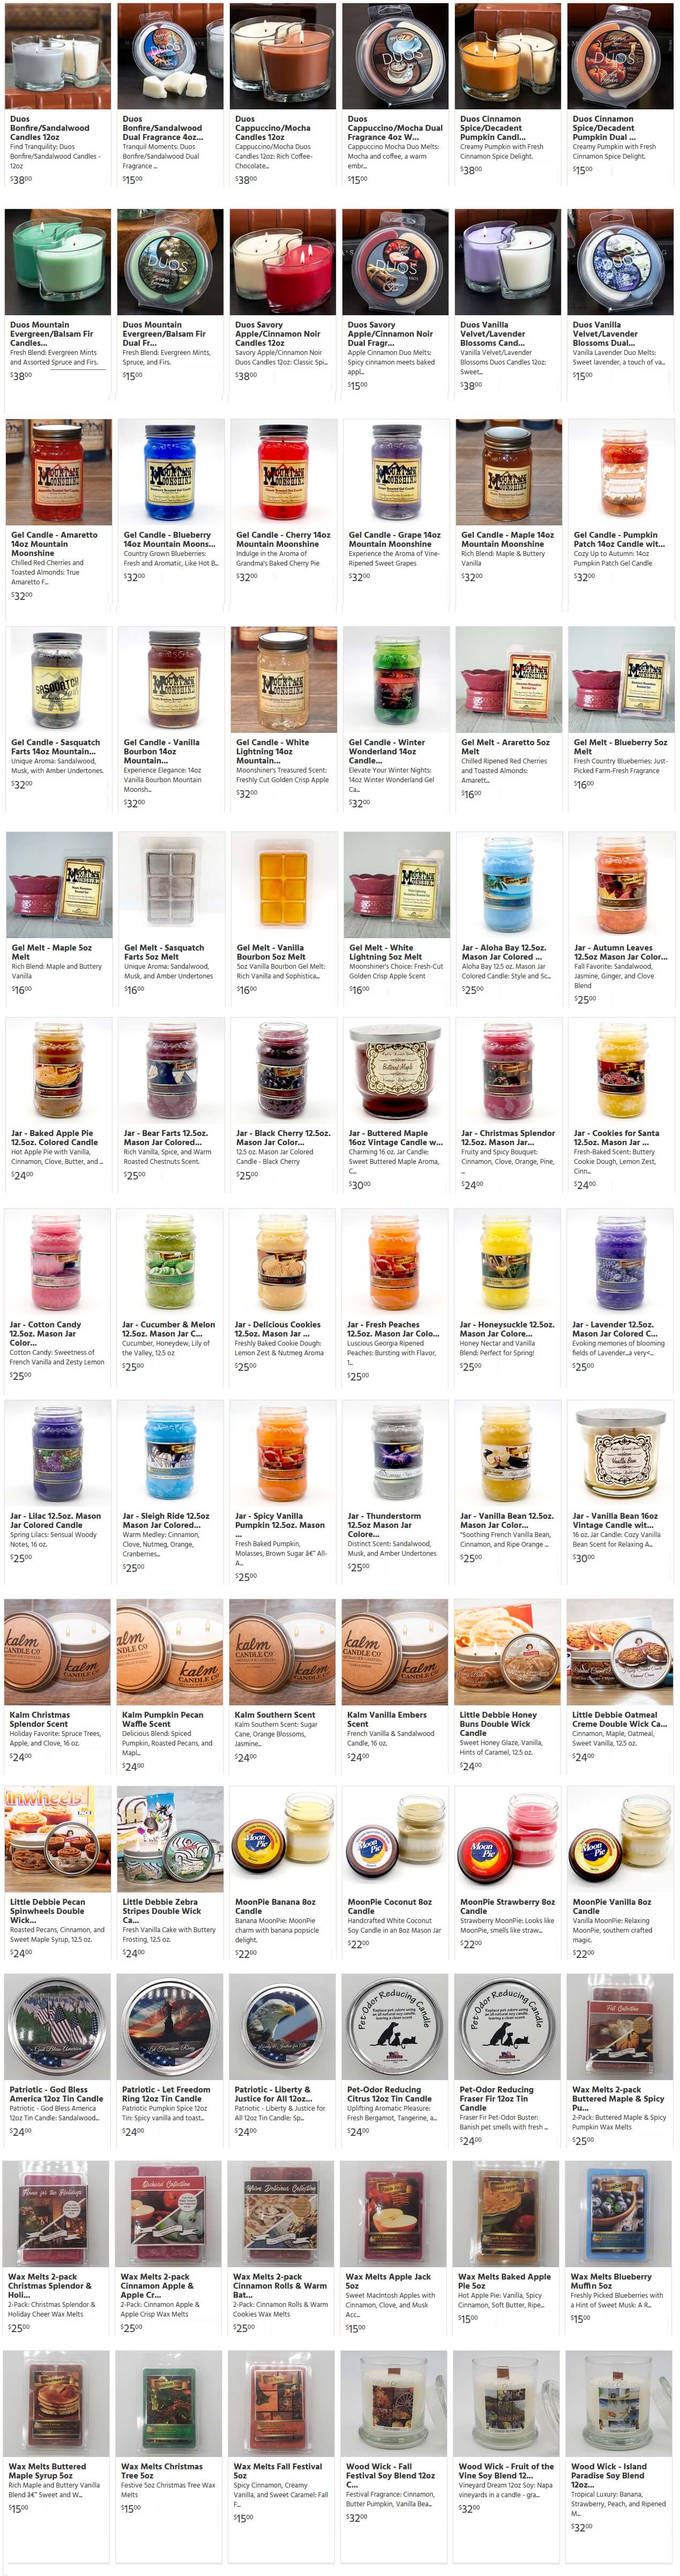 Candles Online Store Products